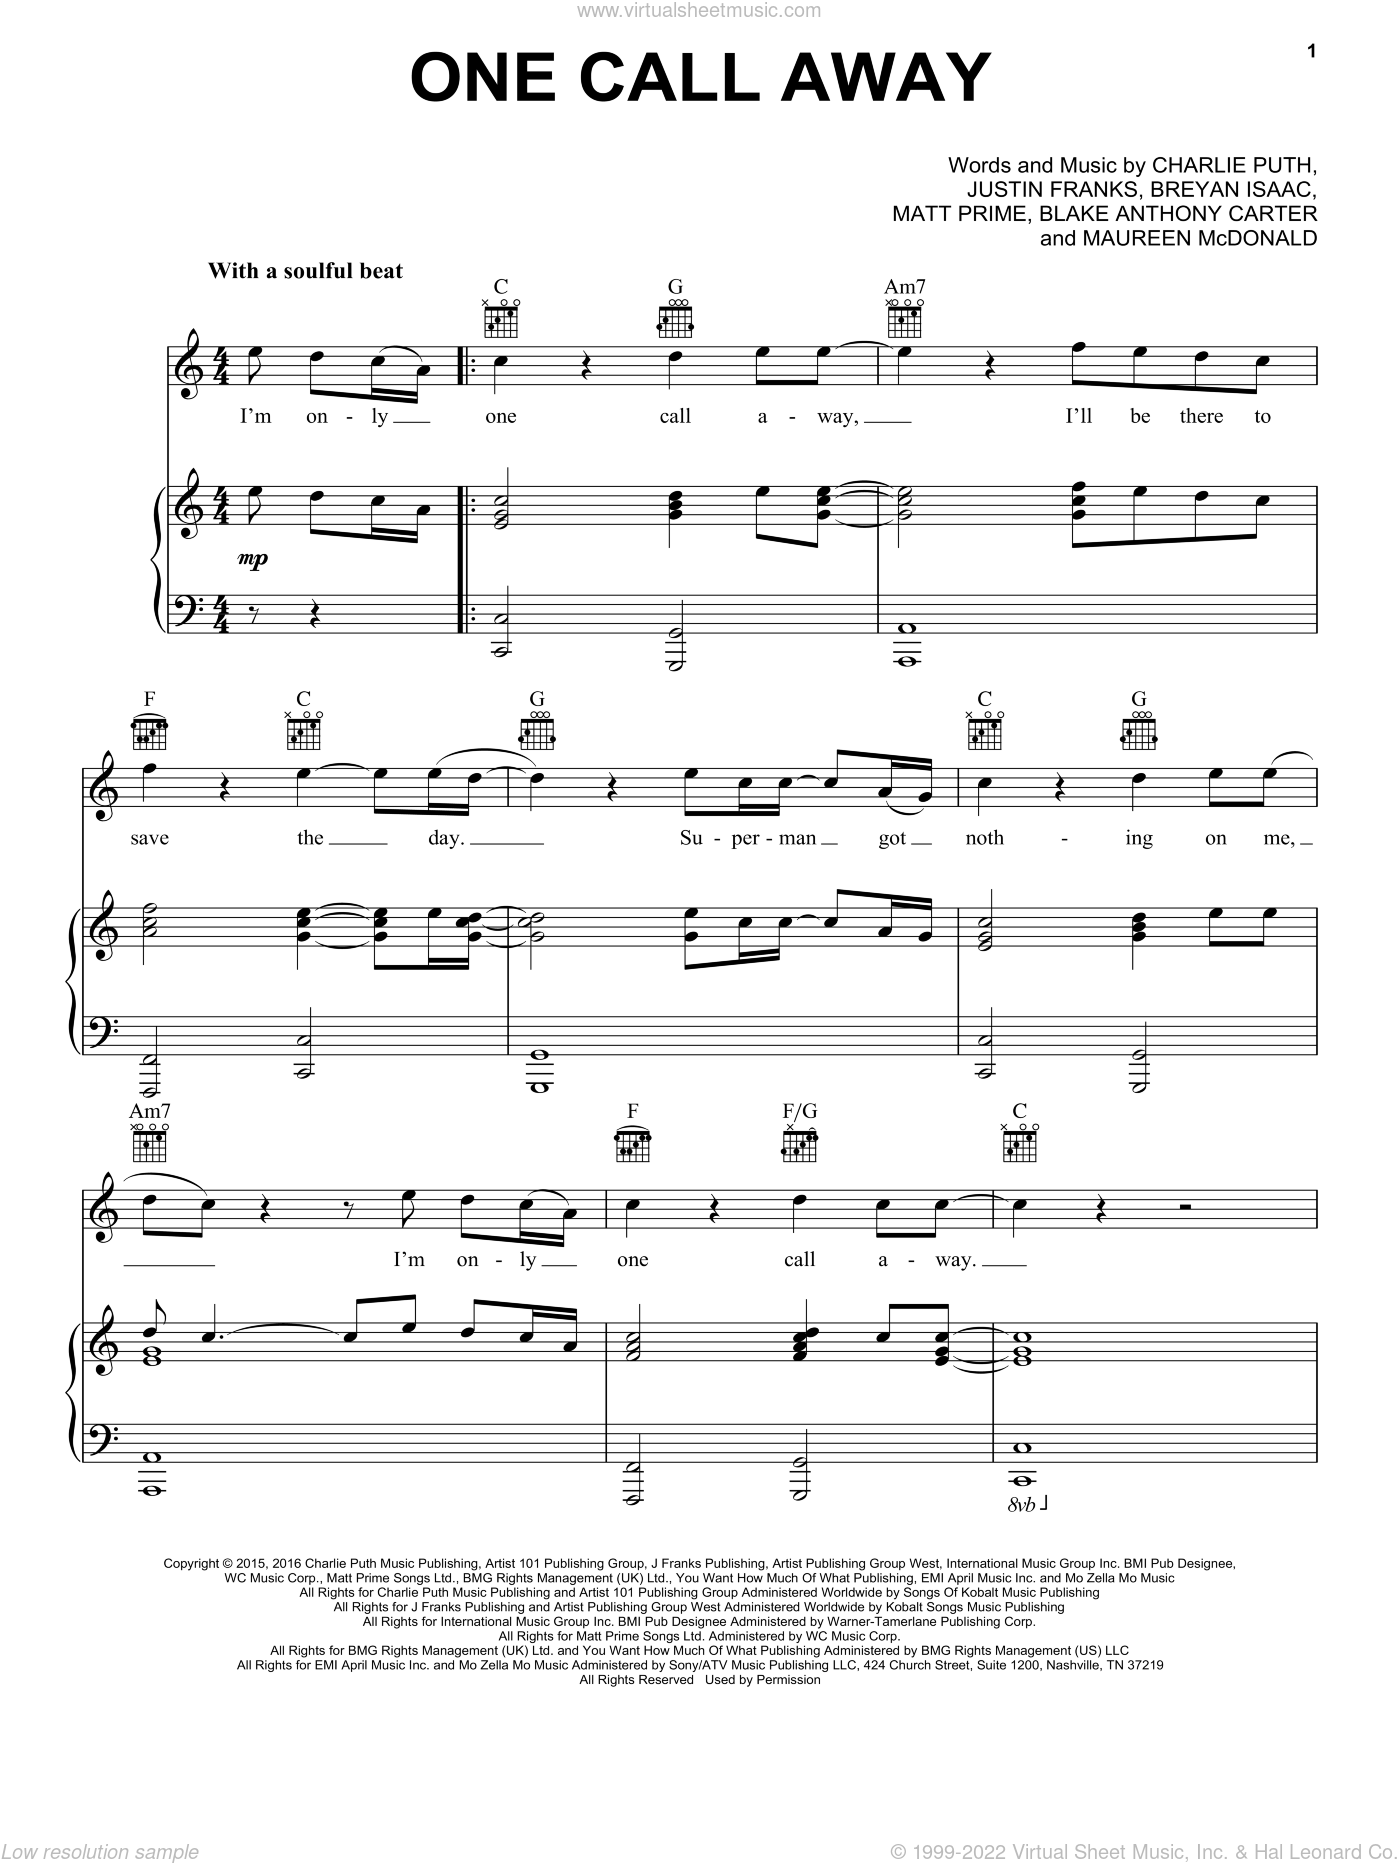 One Call Away Sheet Music For Voice, Piano Or Guitar (Pdf)